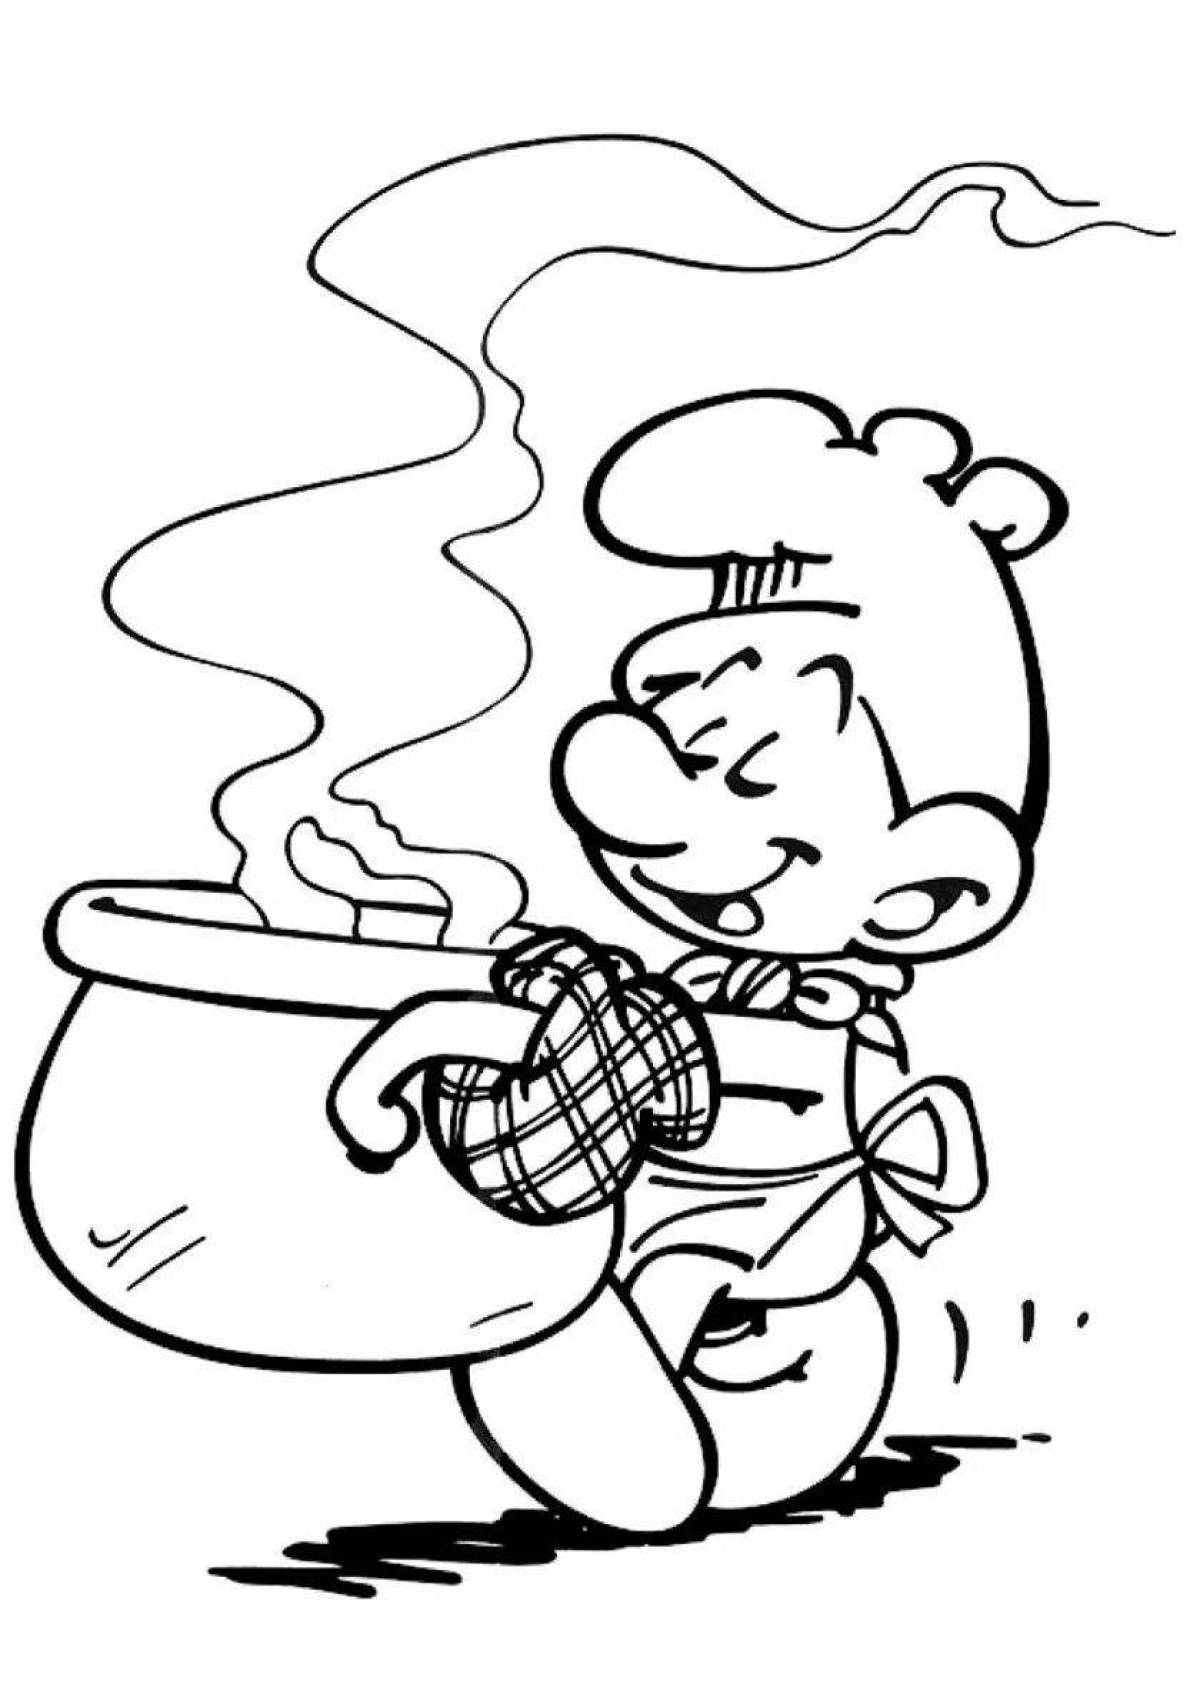 Fun coloring pages of cooks for kindergarten